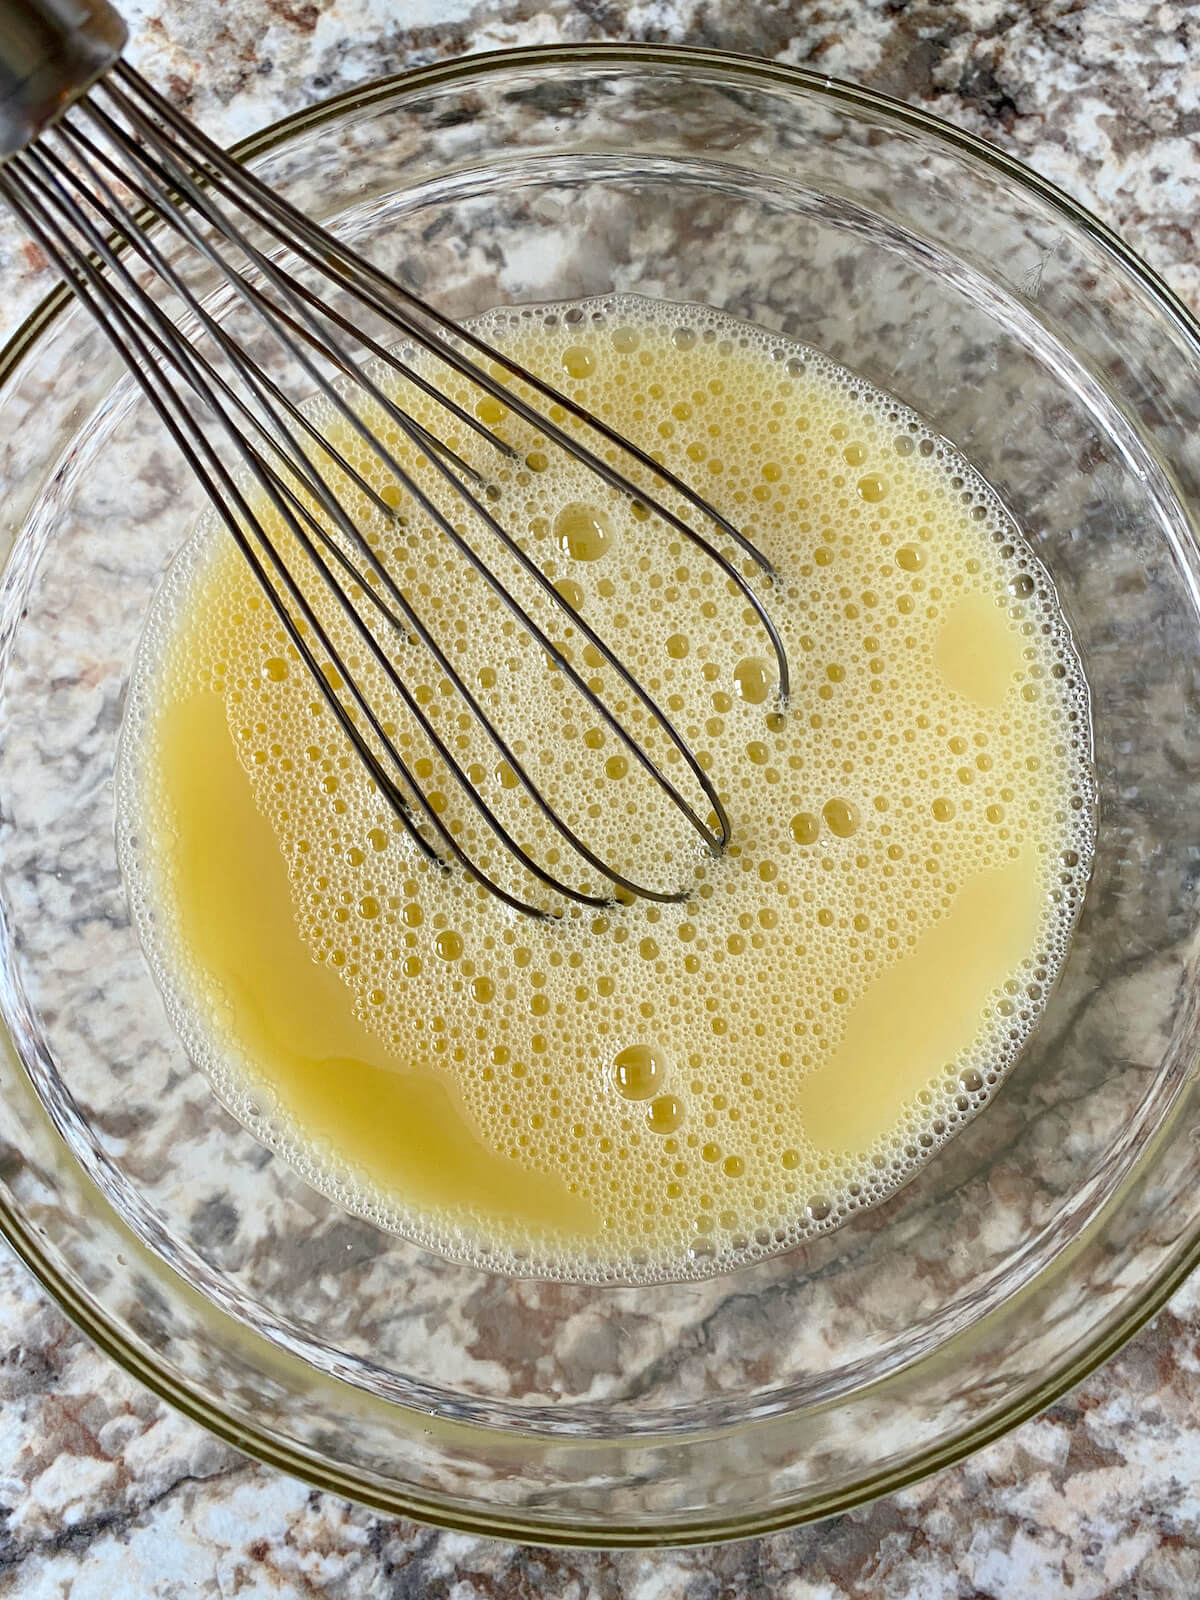 Eggs and chicken stock being whisked together in a clear glass mixing bowl.